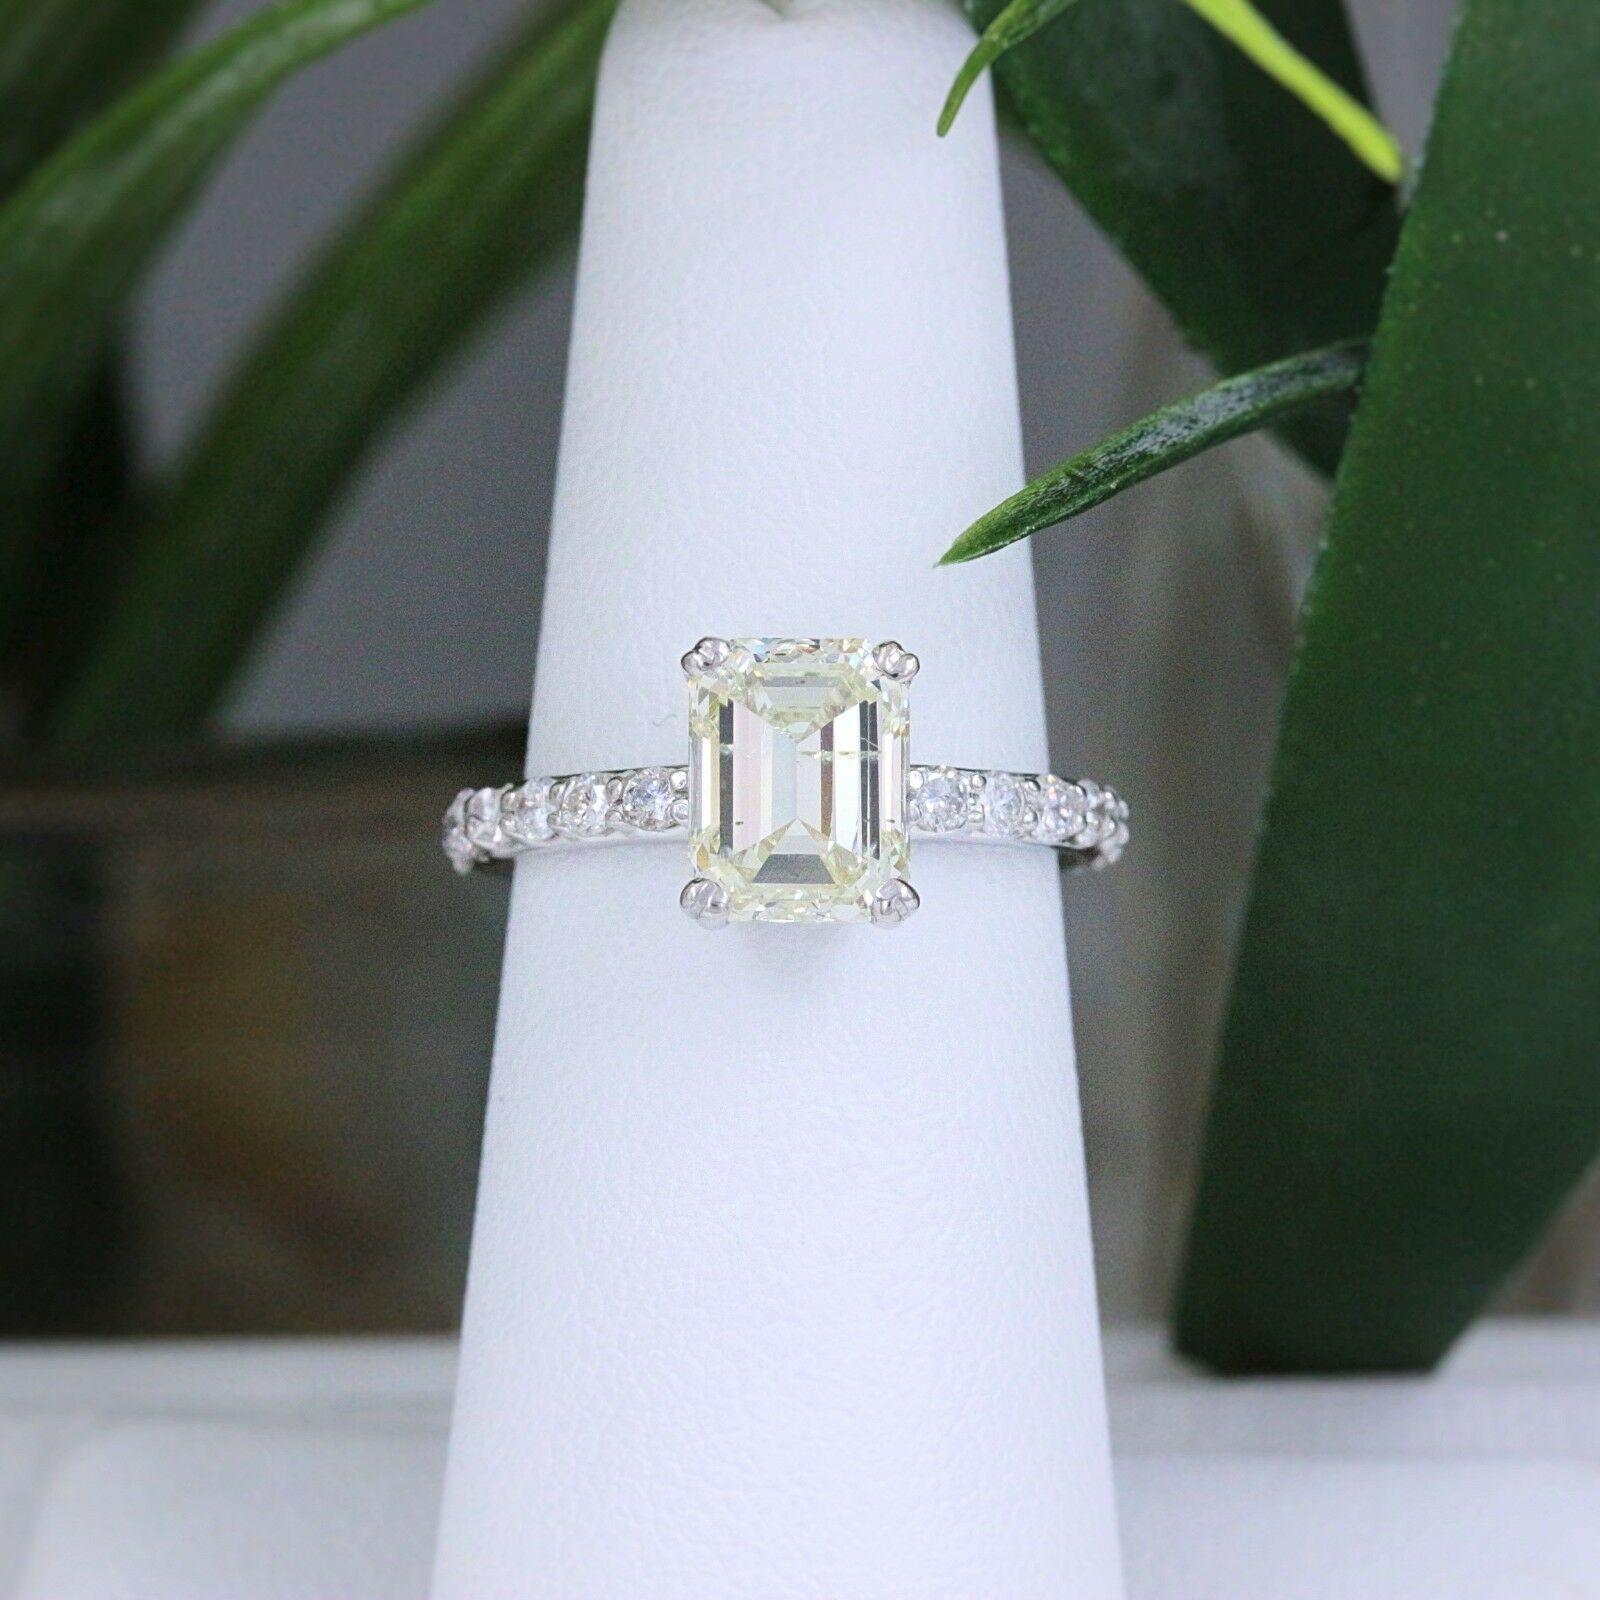 Light Yellow Emerald Diamond with Diamond Band Engagement Ring
Style:  Solitaire with Diamond Accents
Metal:  14k White Gold
Size:  6 - sizable
Total Carat Weight:  2.53 tcw
Diamond Shape:  Emerald Cut Diamond 2.05 cts Light Yellow color, SI2